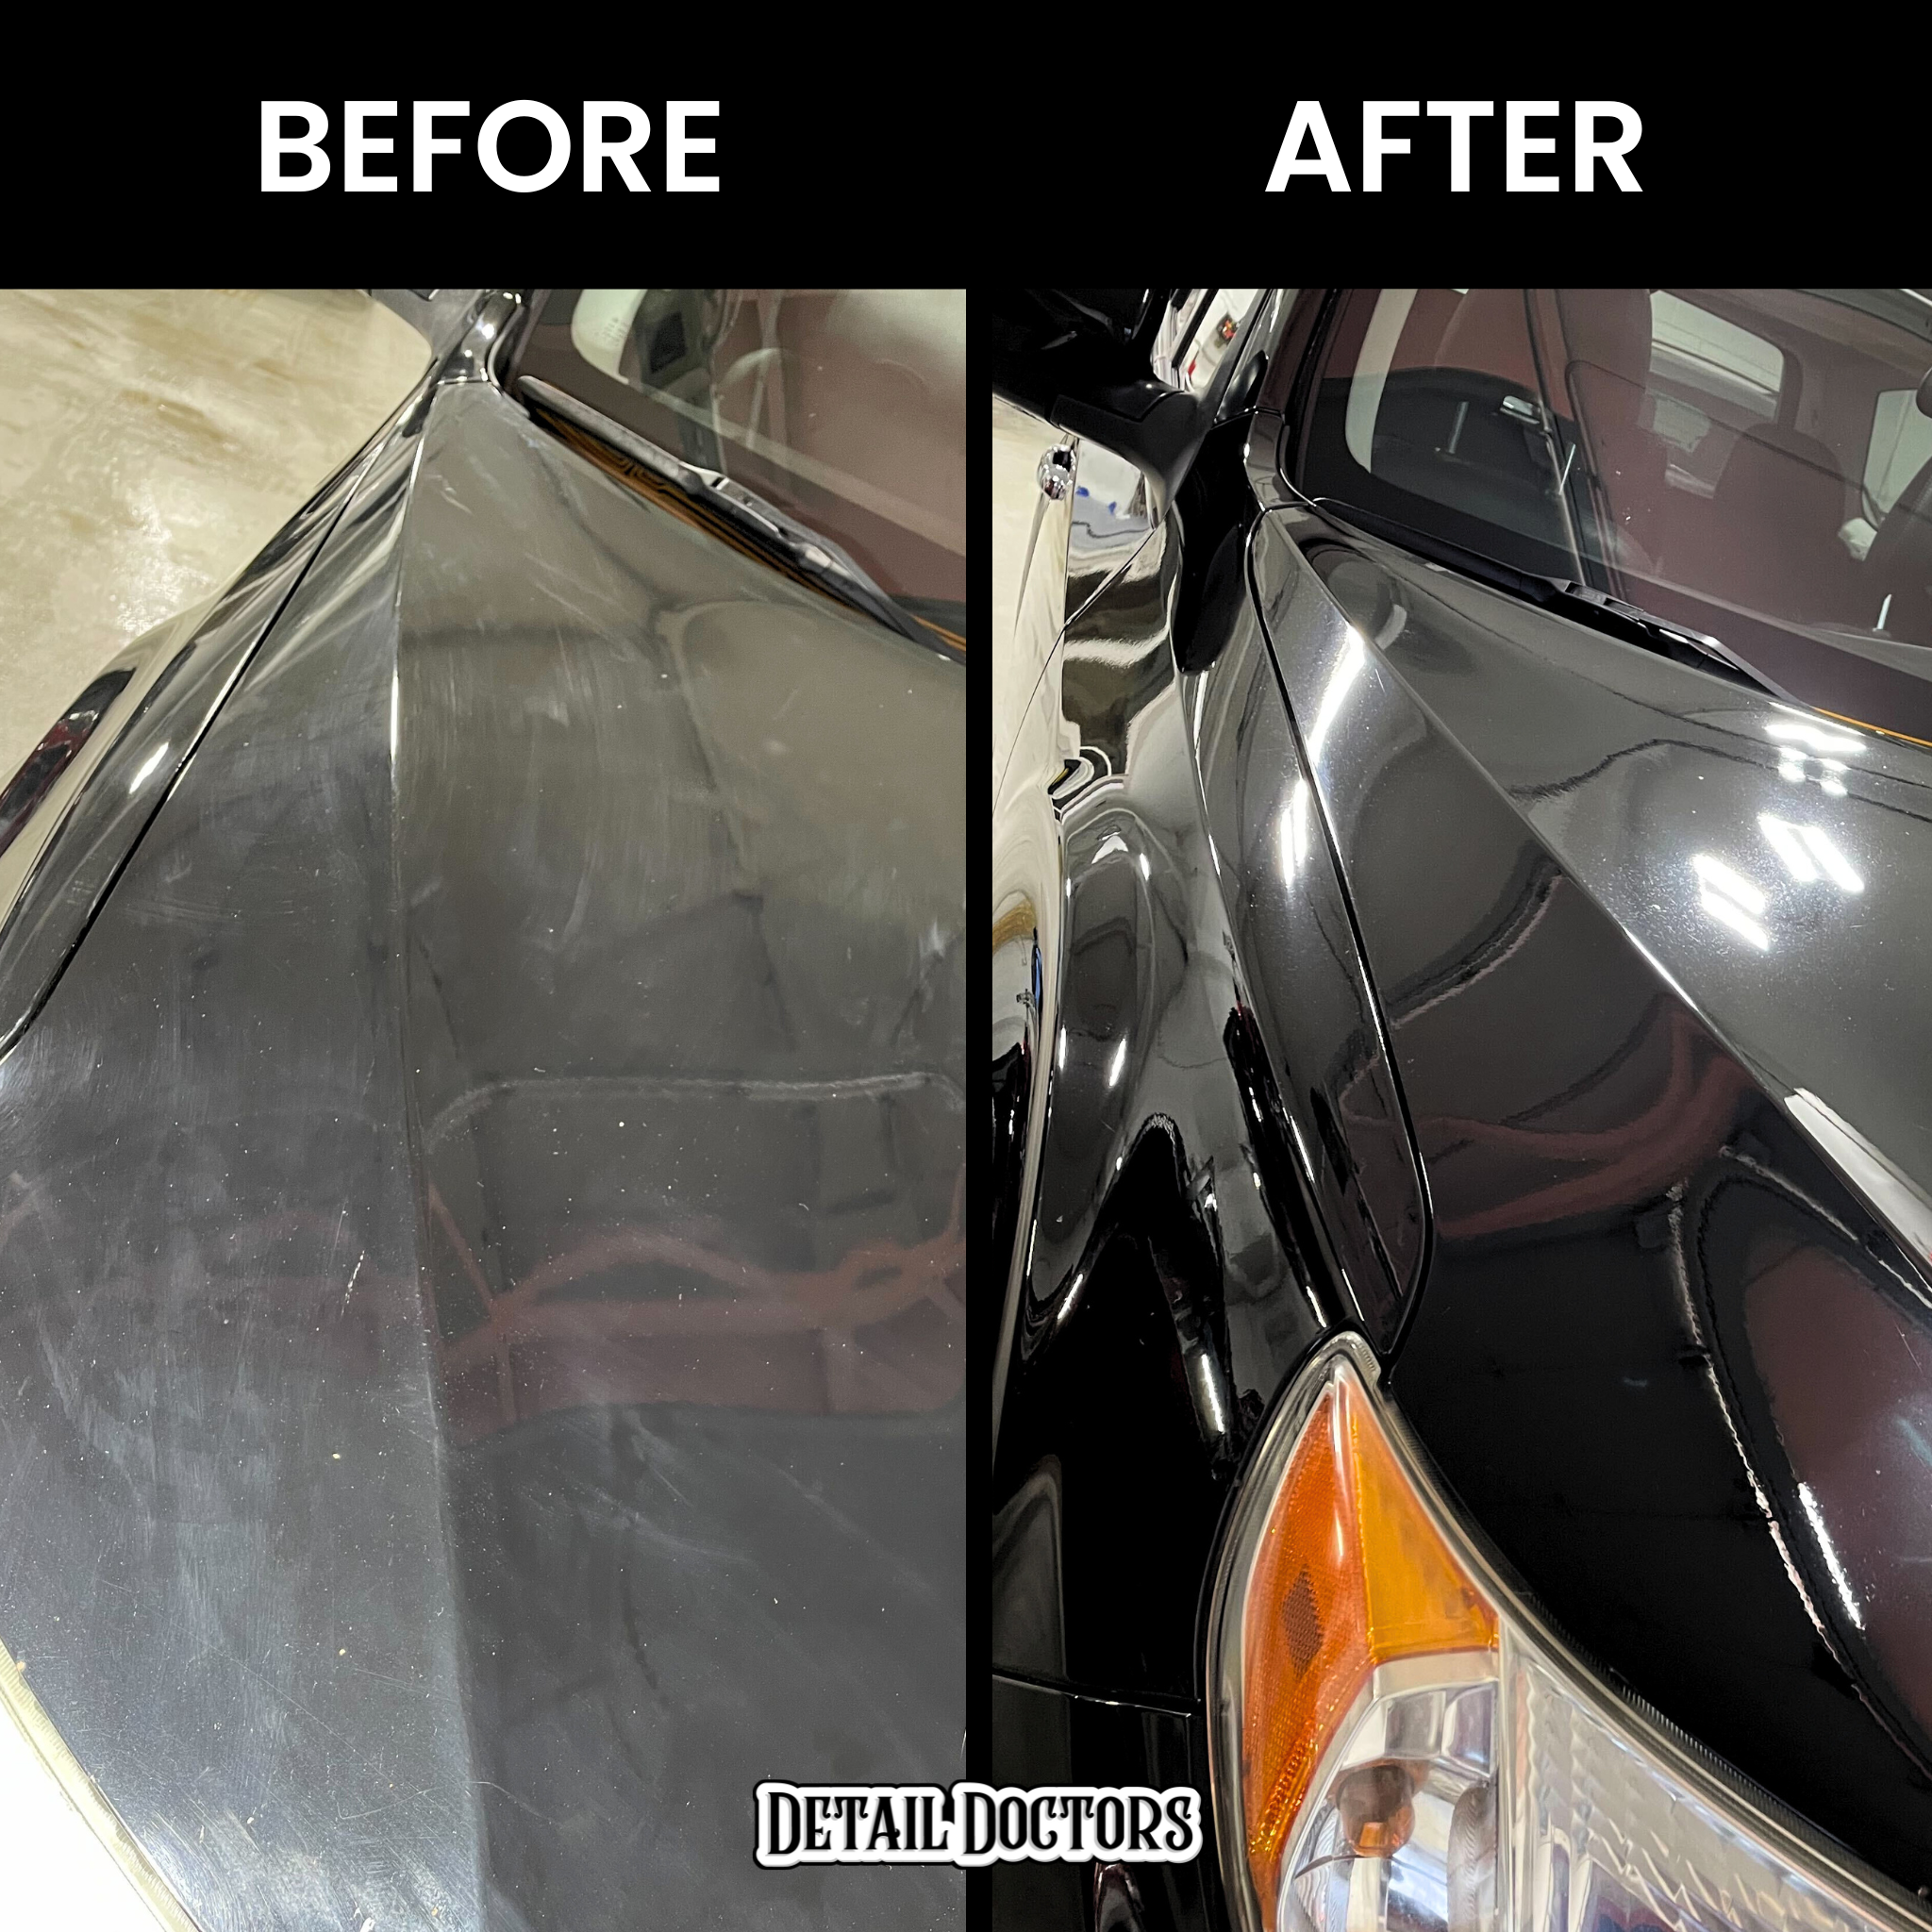 Wax vs. Compound in Auto Detailing Careers